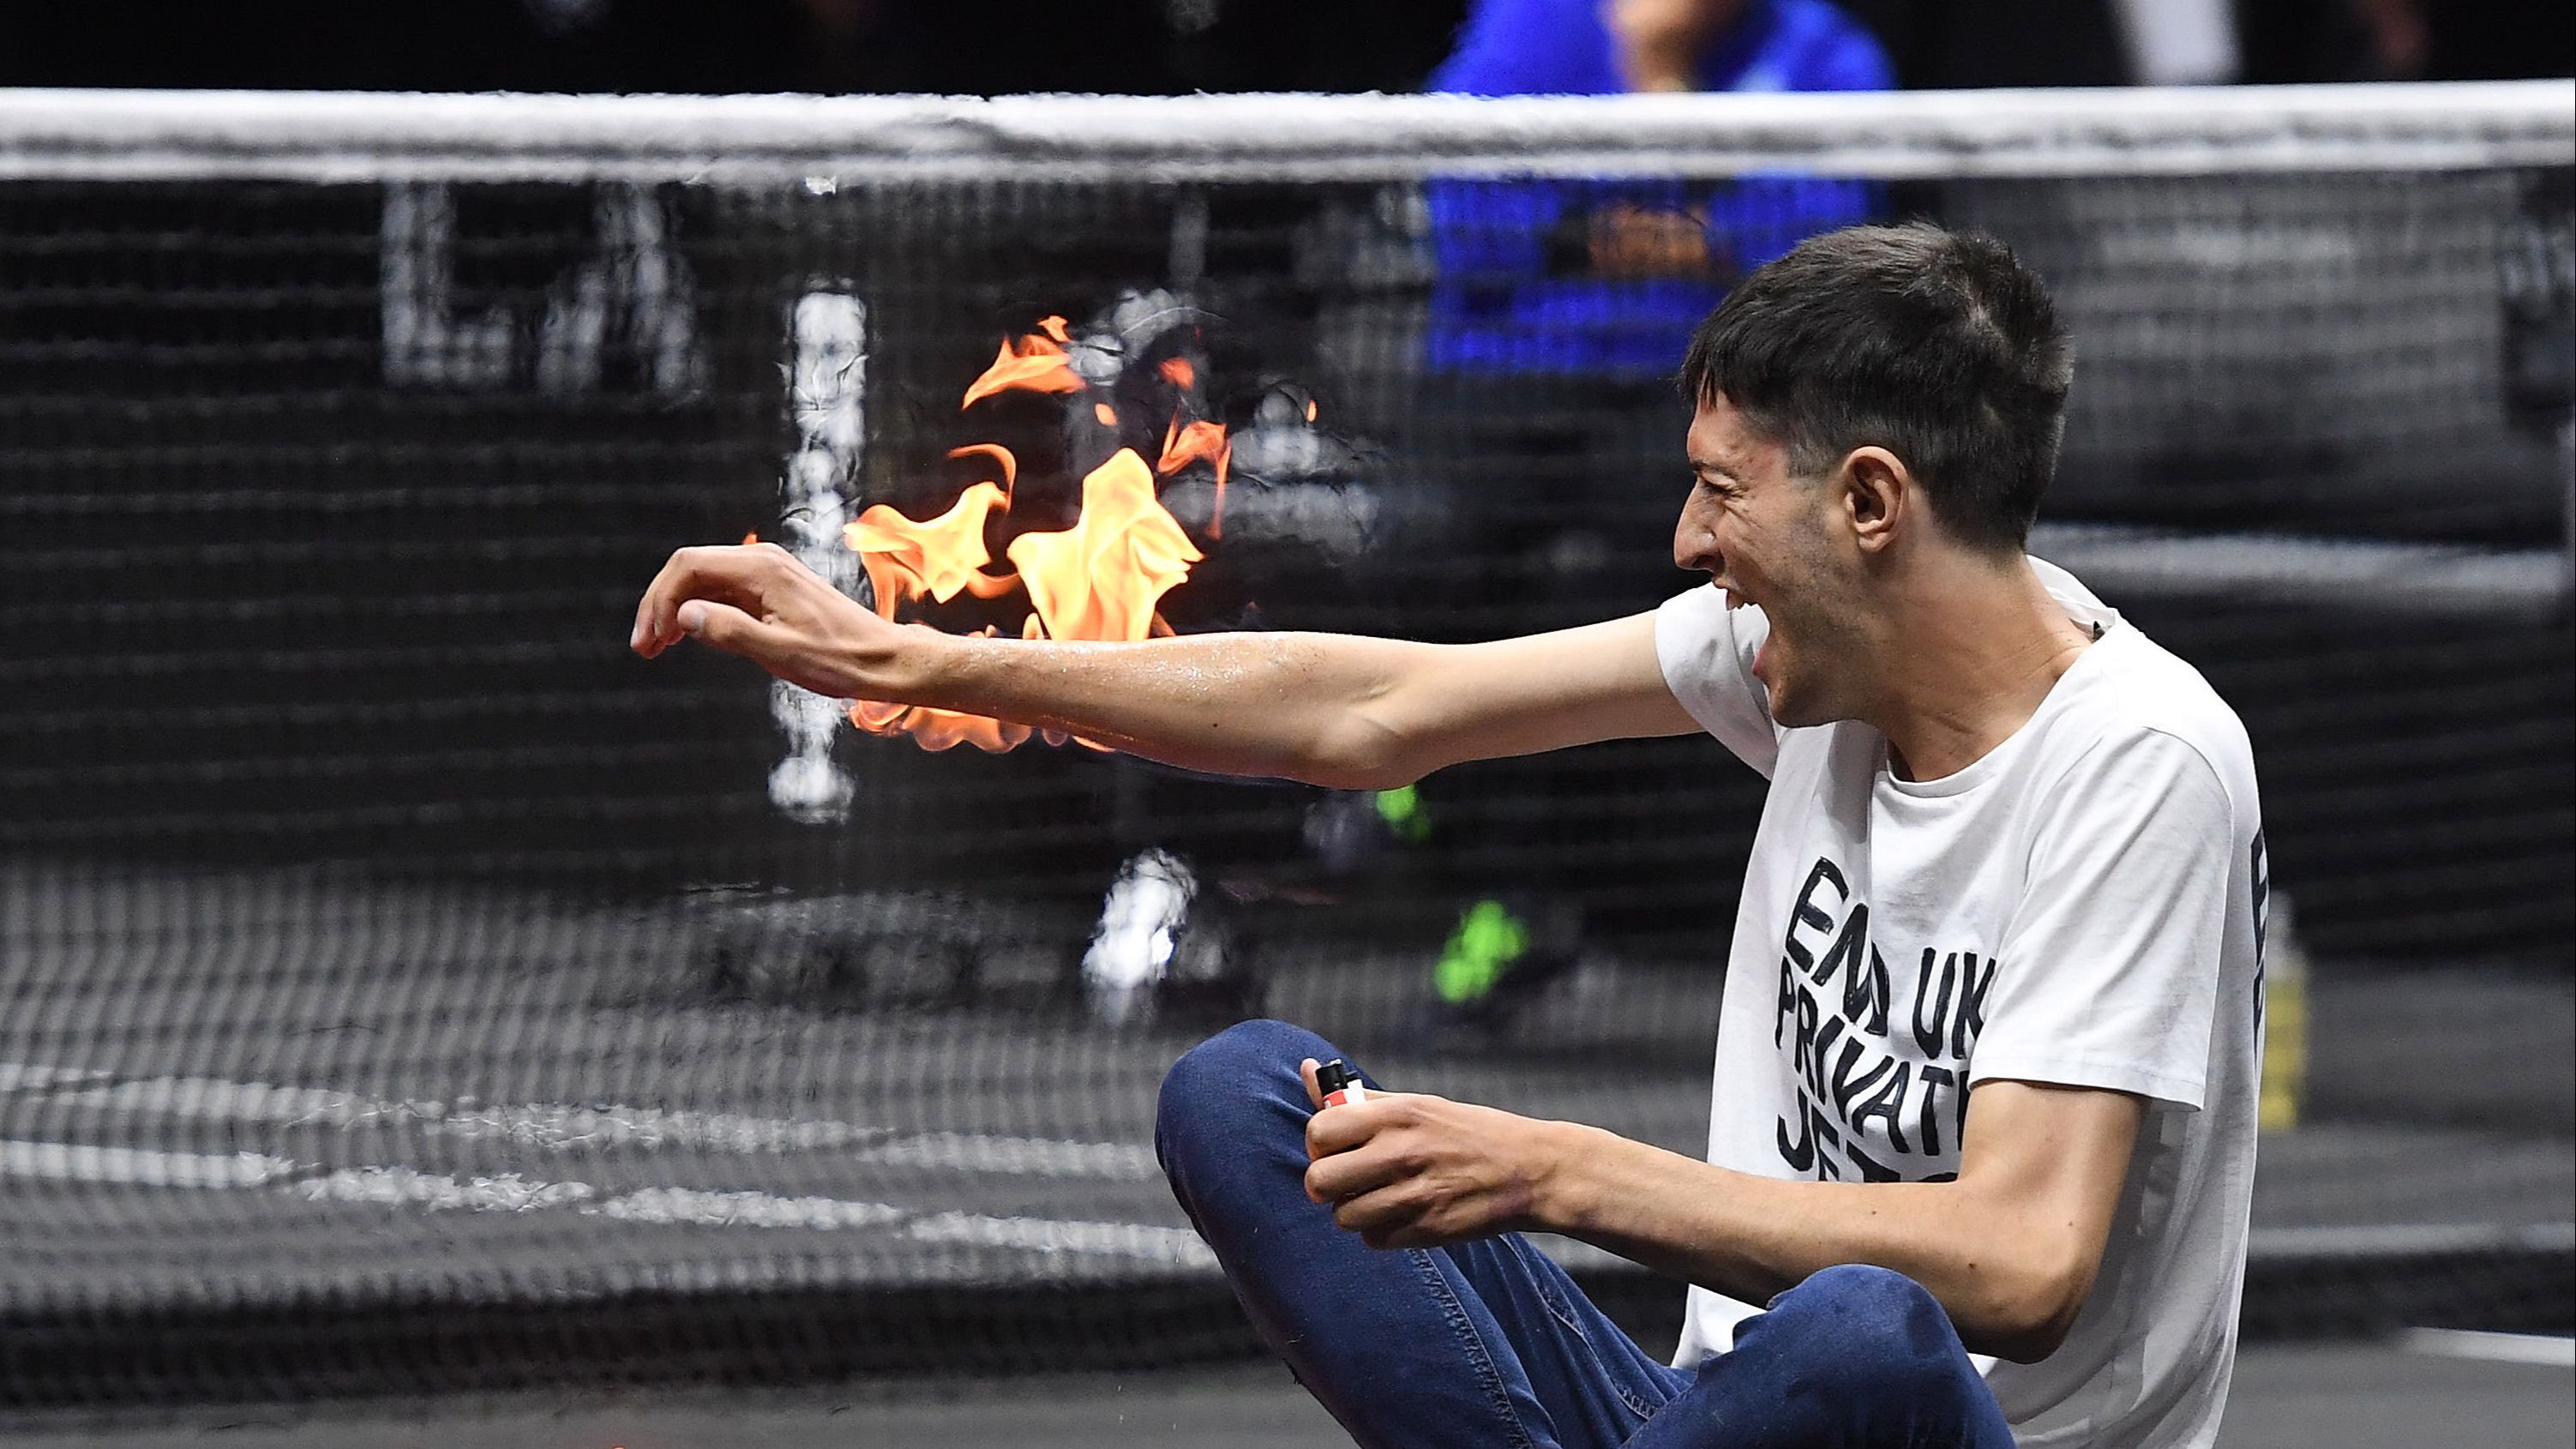 A man jumps onto the Laver Cup track and sets his arm on fire